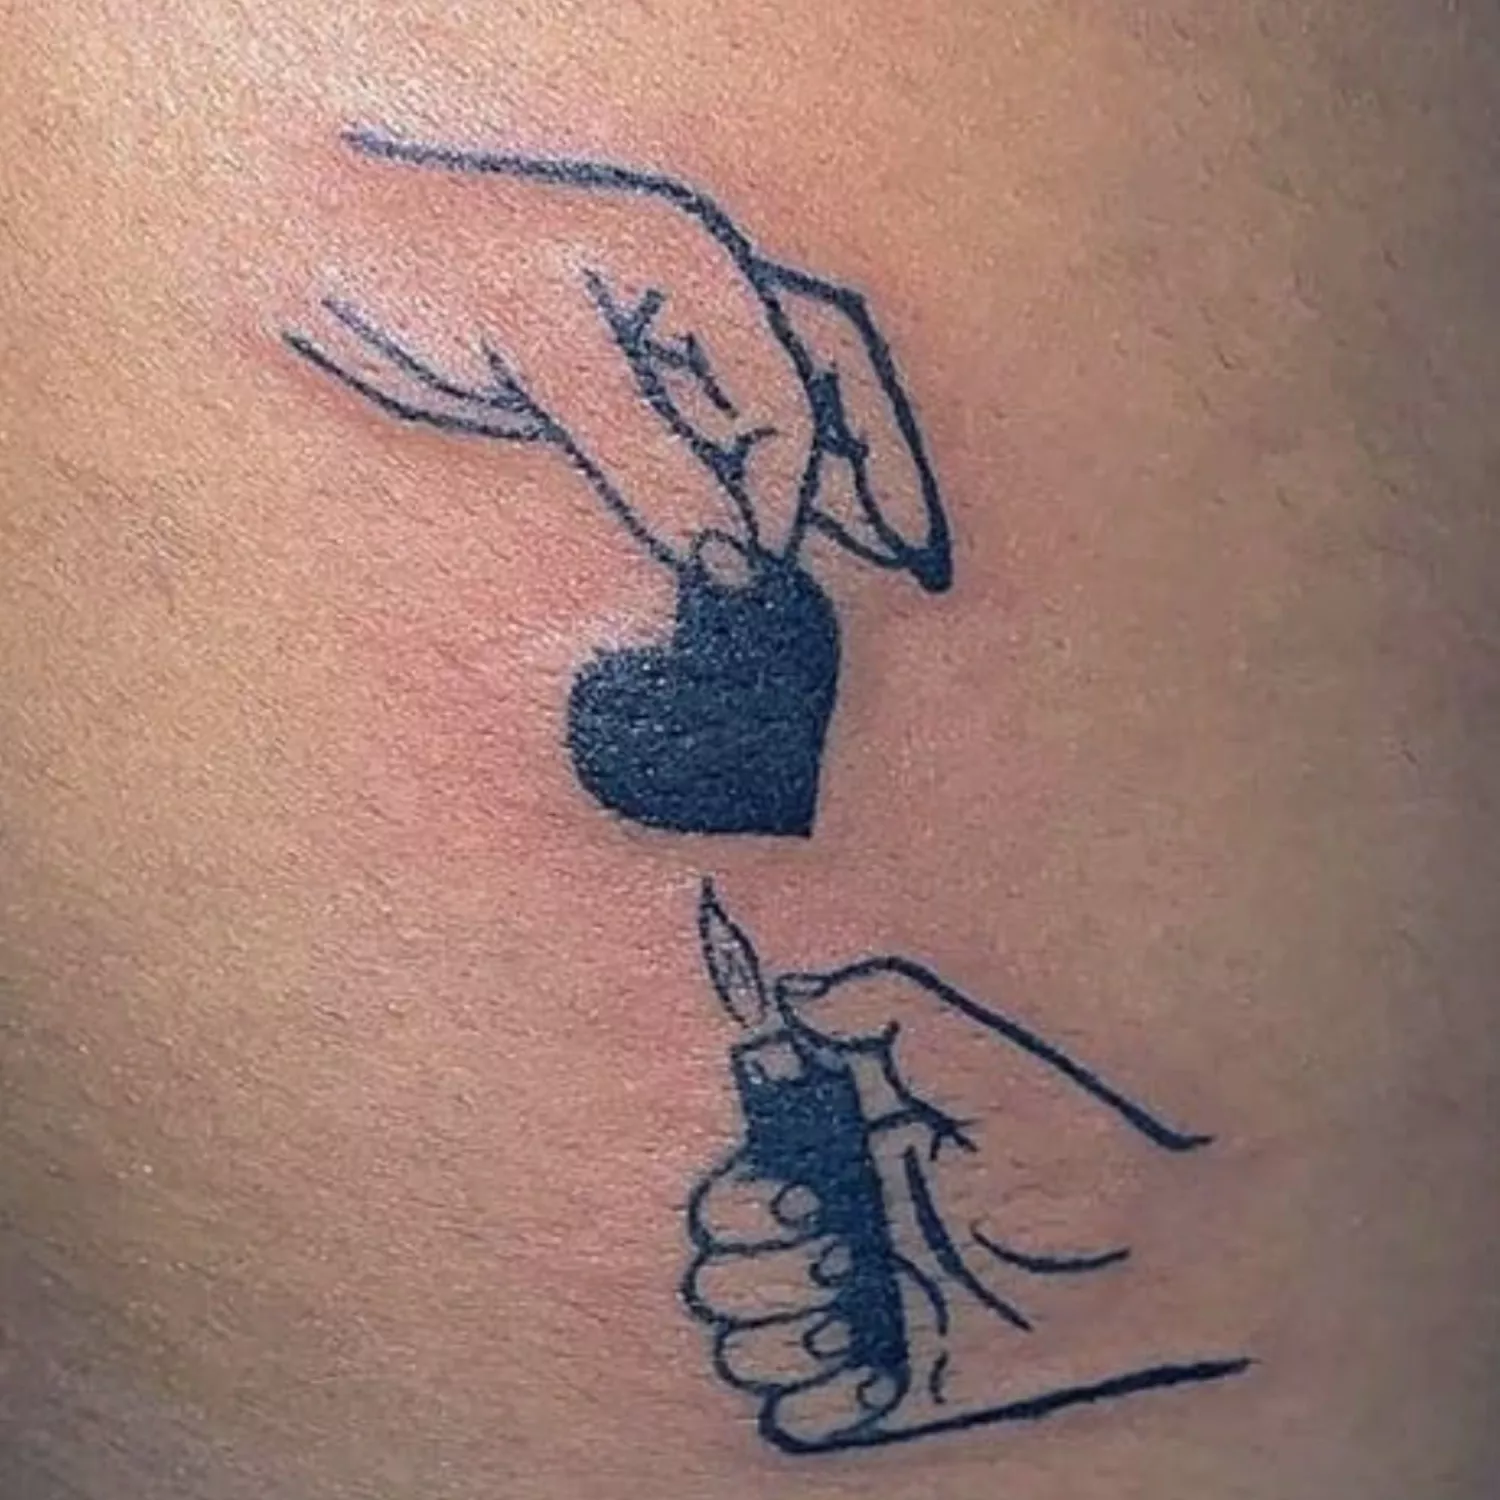 A tattoo of a hand holding a heart and another hand lighting up a lighter below it.